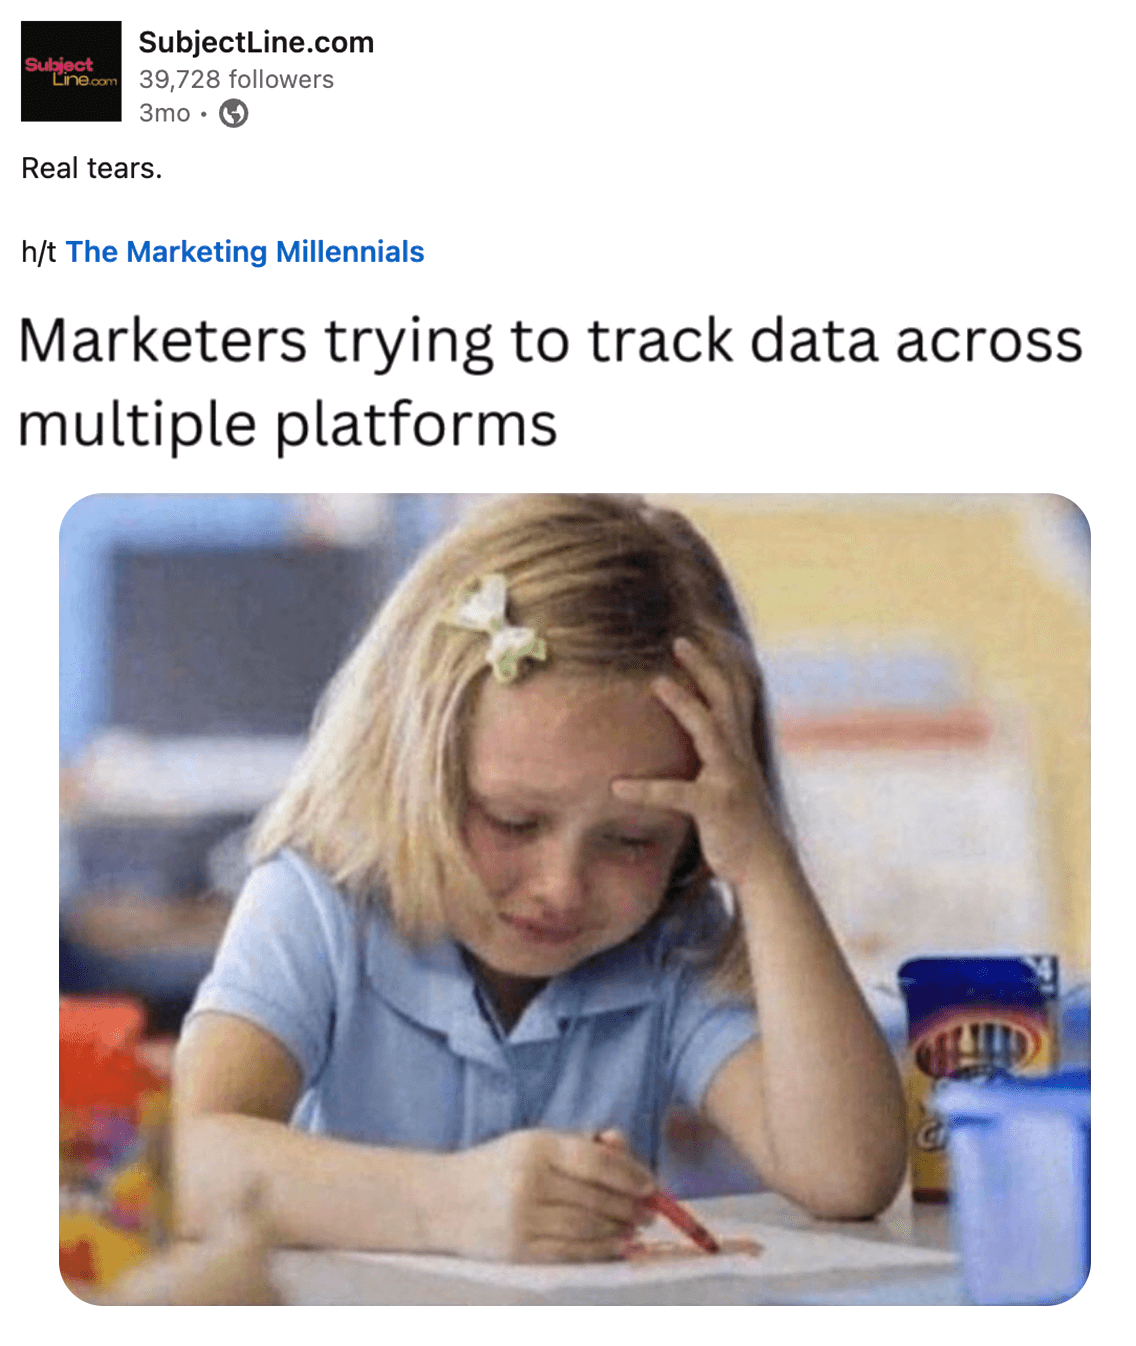 SubjectLine.com on LinkedIn says, 'Real tears' with a meme that says, 'Marketers trying to track data across multiple platforms' with a child on the verge of tears at their desk, holding a crayon while coloring.